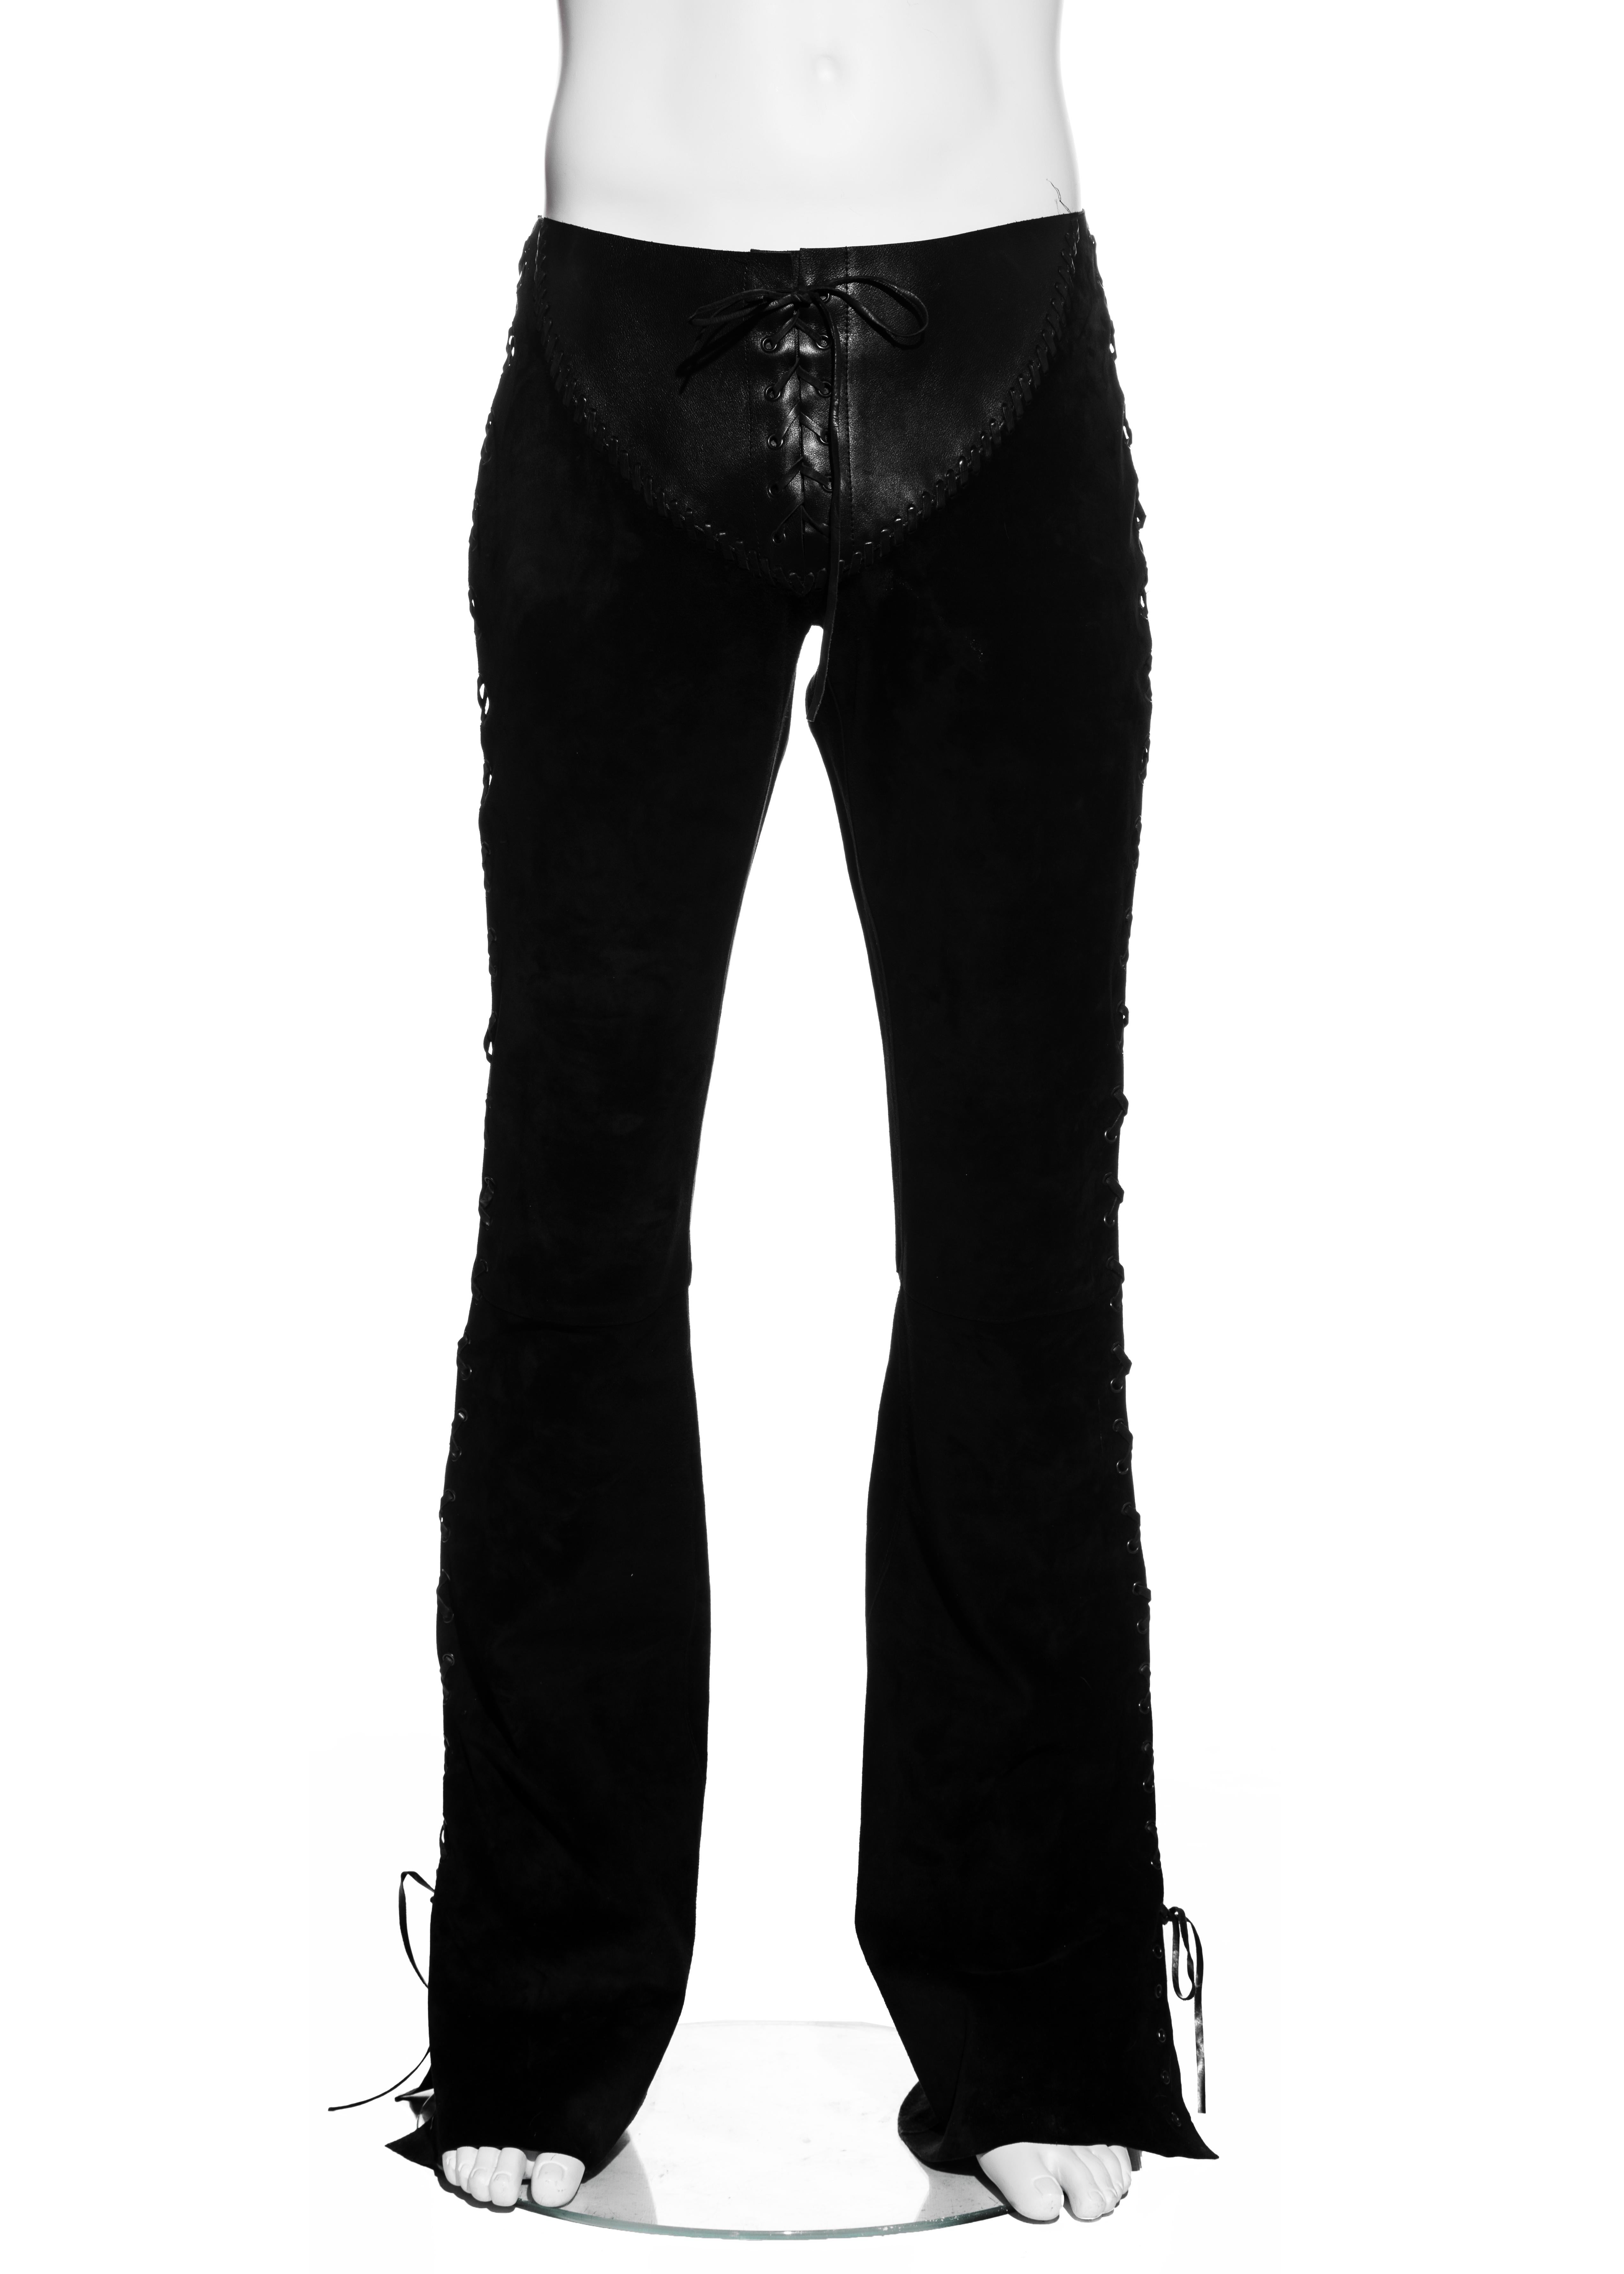 ▪ Gucci men's leather and suede flared pants 
▪ Designed by Tom Ford
▪ Leather lace up fastenings at side seams and  crotch
▪ Metal grommets 
▪ Leather braided trim 
▪ Size 48
▪ Spring-Summer 2004